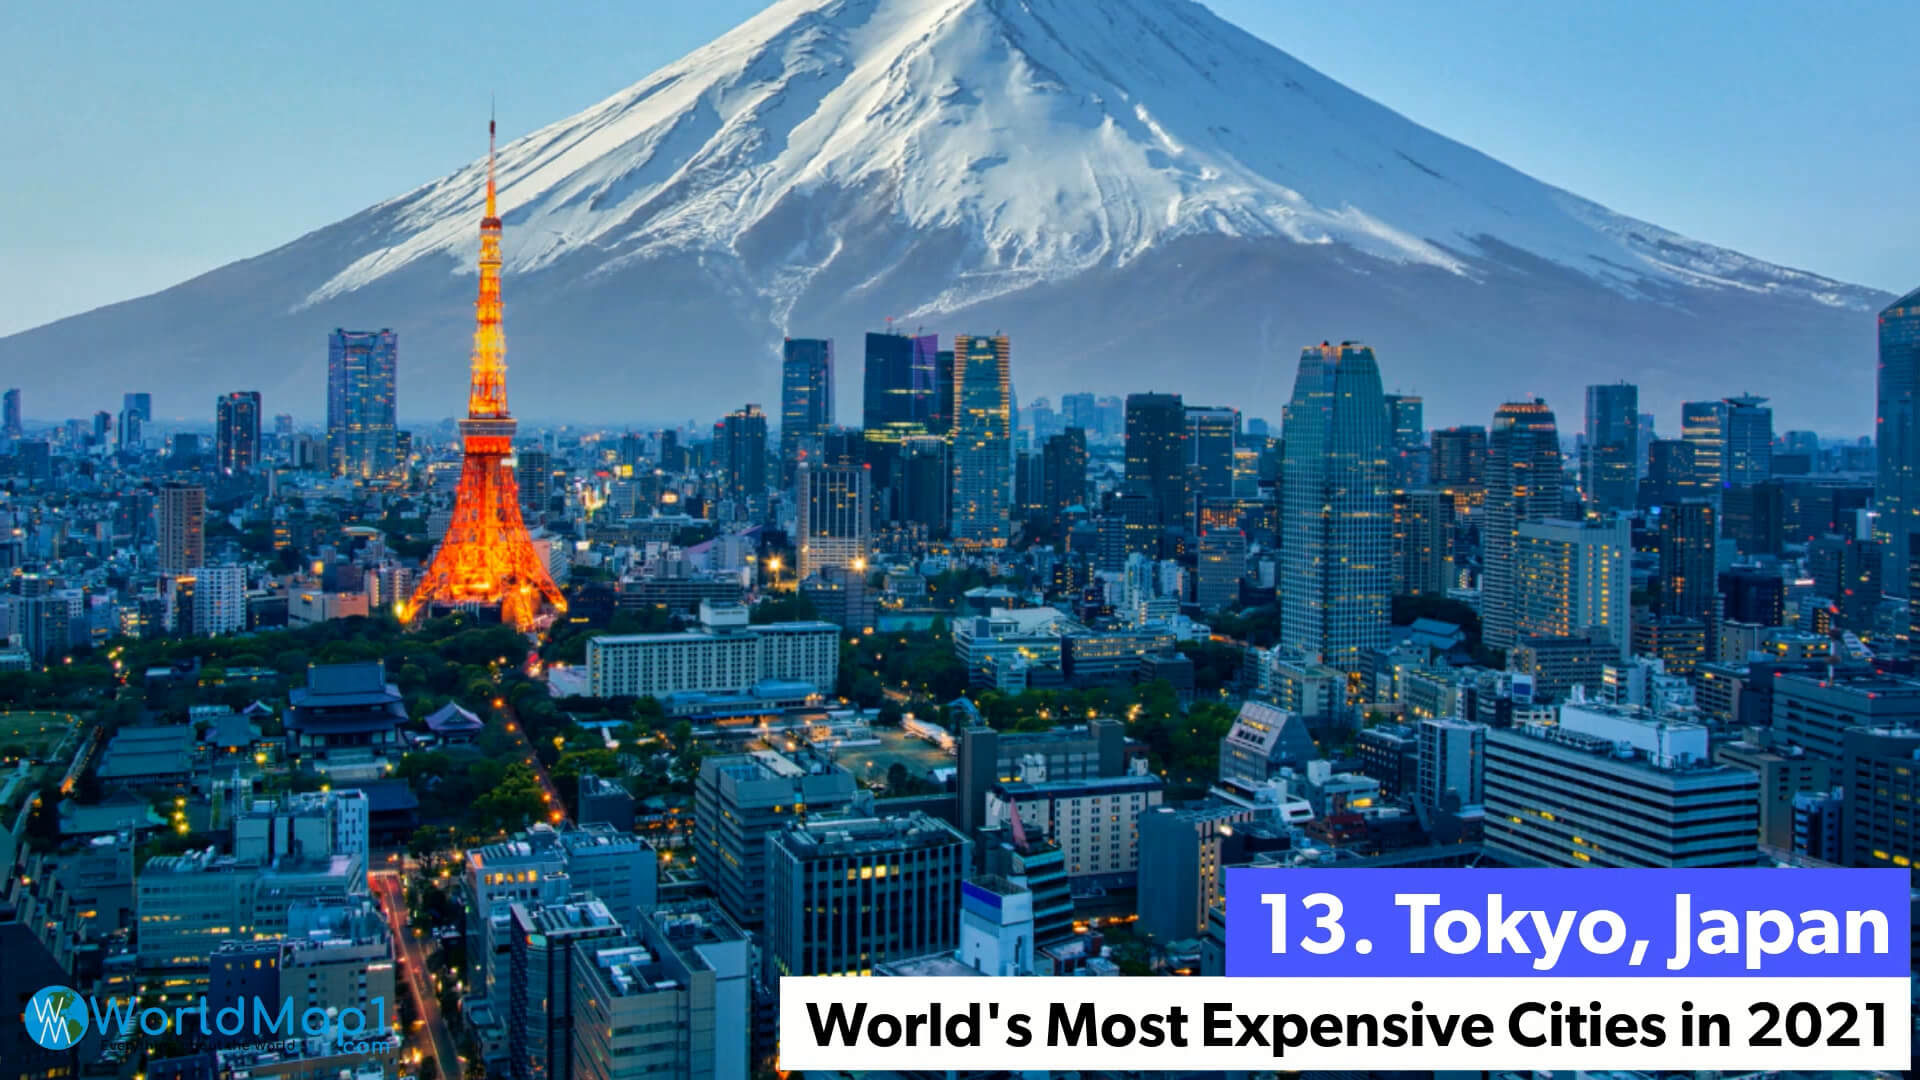 World's Most Expensive Cities - Tokyo, Japan